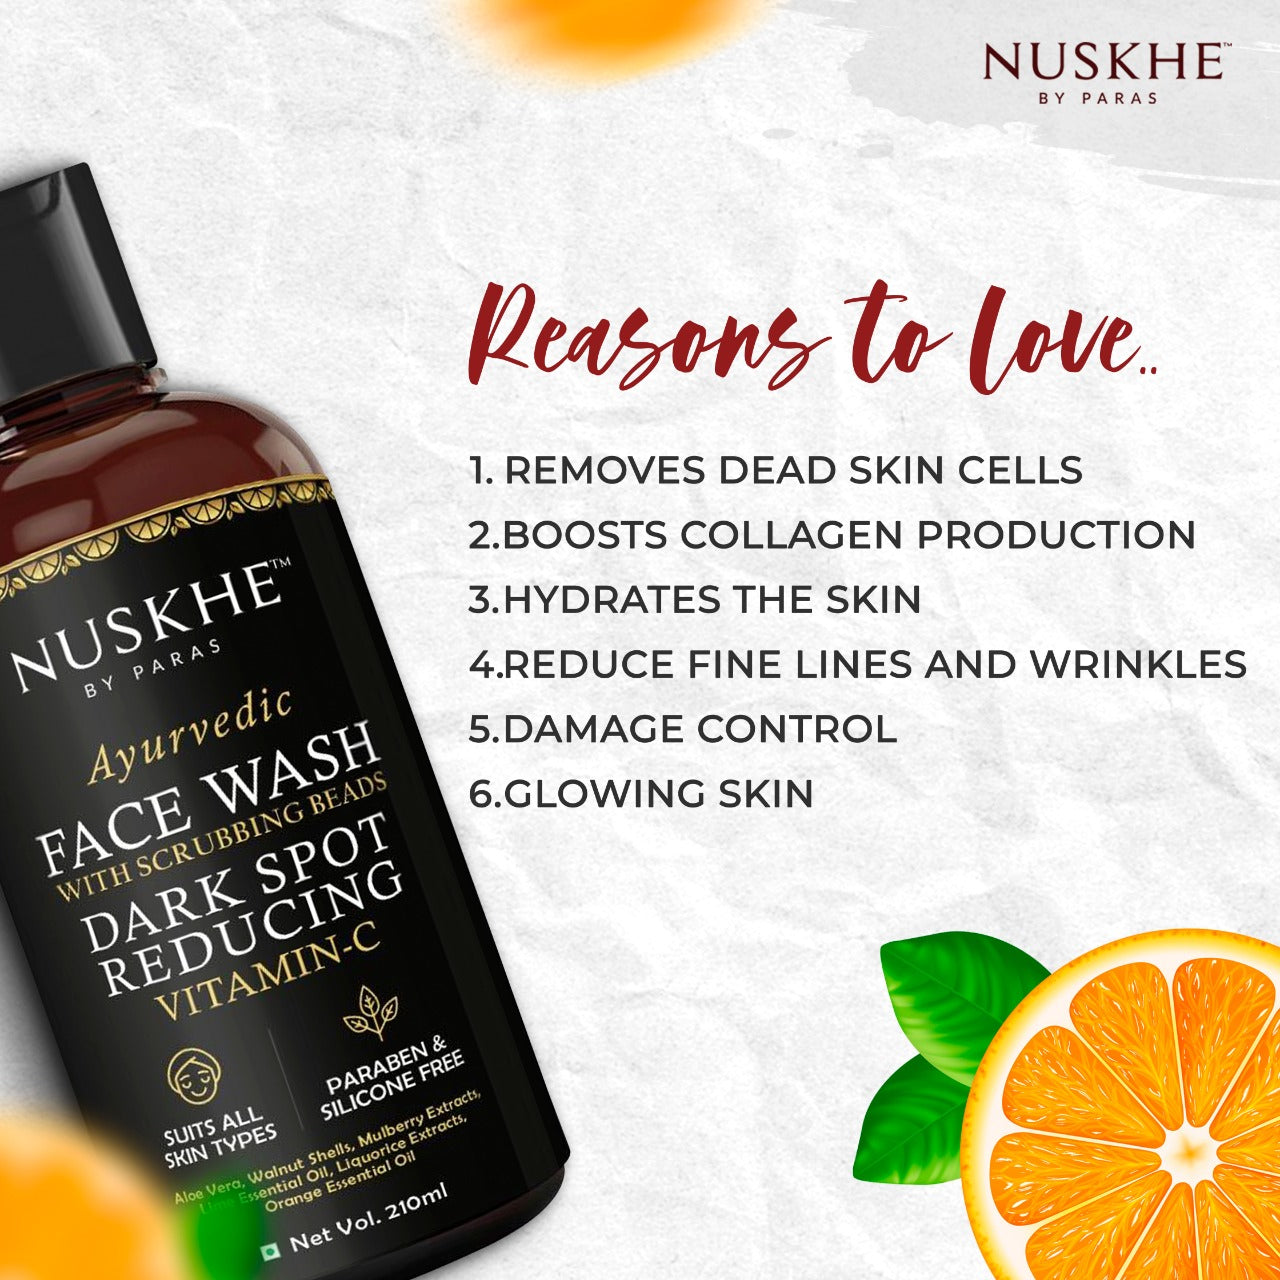 Nuskhe by Paras Dark Spot Reducing Vitamin C Face Wash-210ml | Scrubbing Beads | Removes Impurities| Skin Smoothening | No Parabens, Sulphate, Silicones & Color